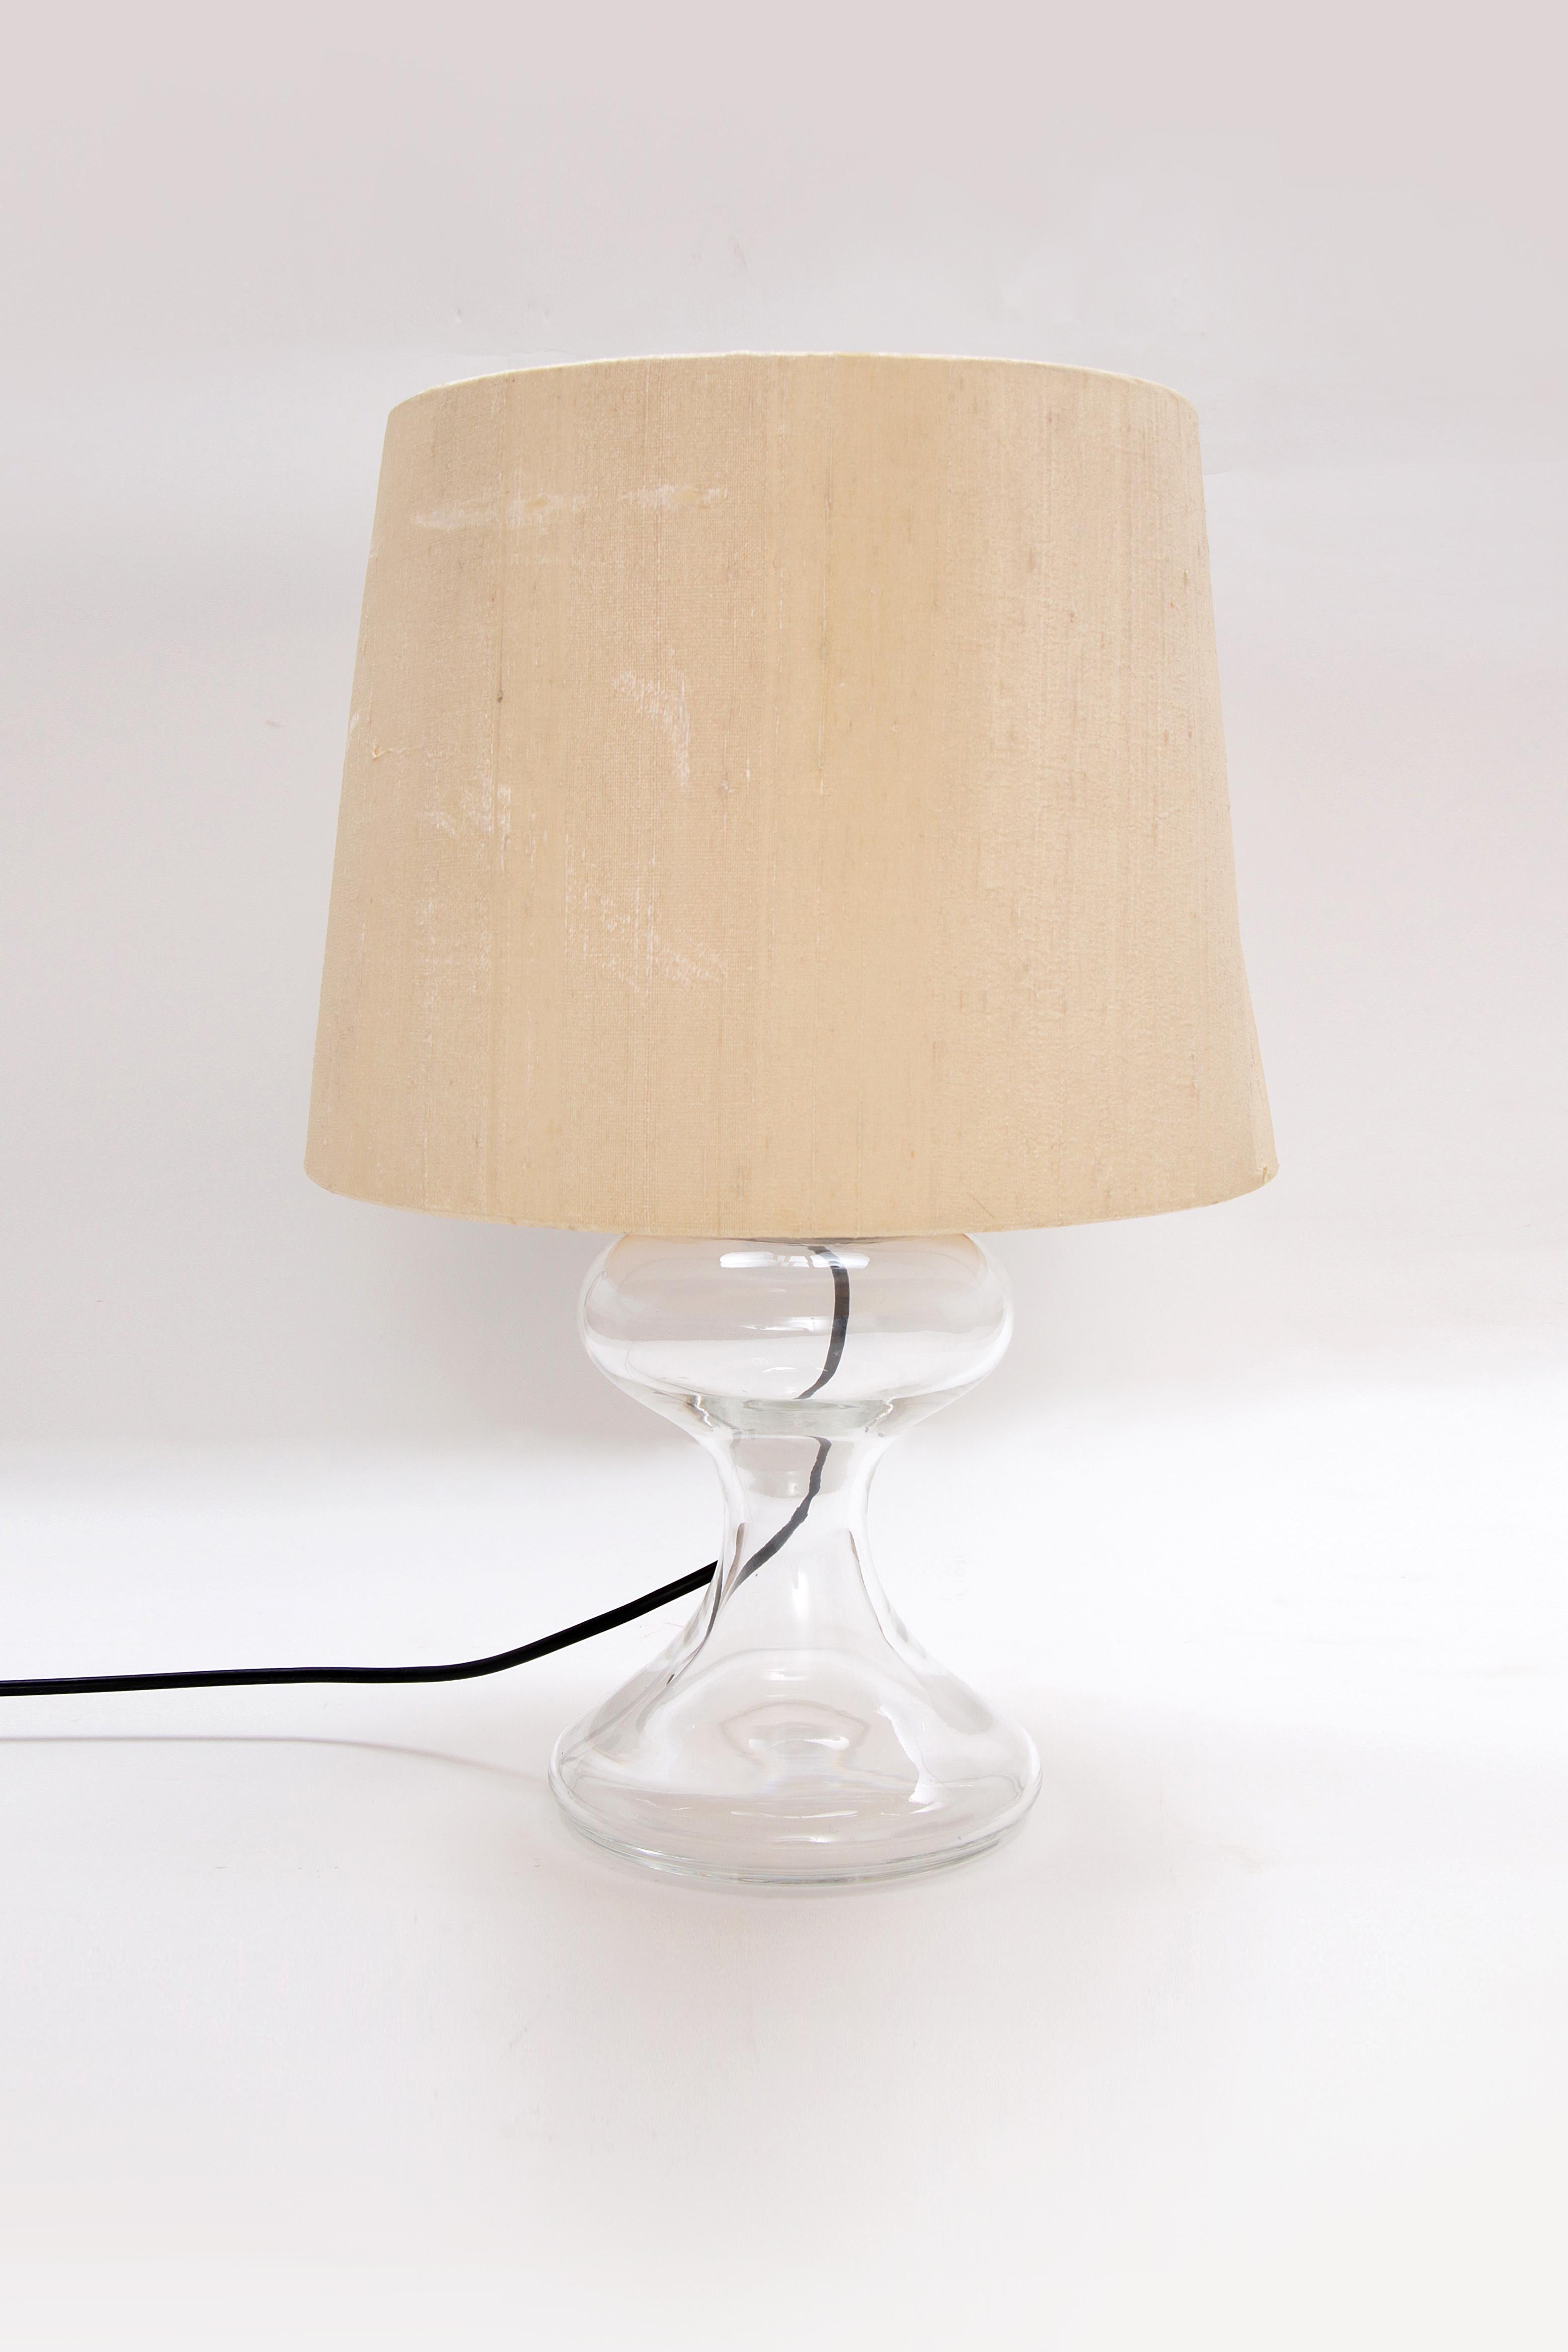 Ingo Maurer ML1 Table Lamp - Mouth-blown Design Lighting

Discover the unique beauty of the Ingo Maurer ML1 table lamp, a masterpiece of hand-blown glass that provides atmospheric lighting for any room. This exclusive lamp, produced by Design M, is